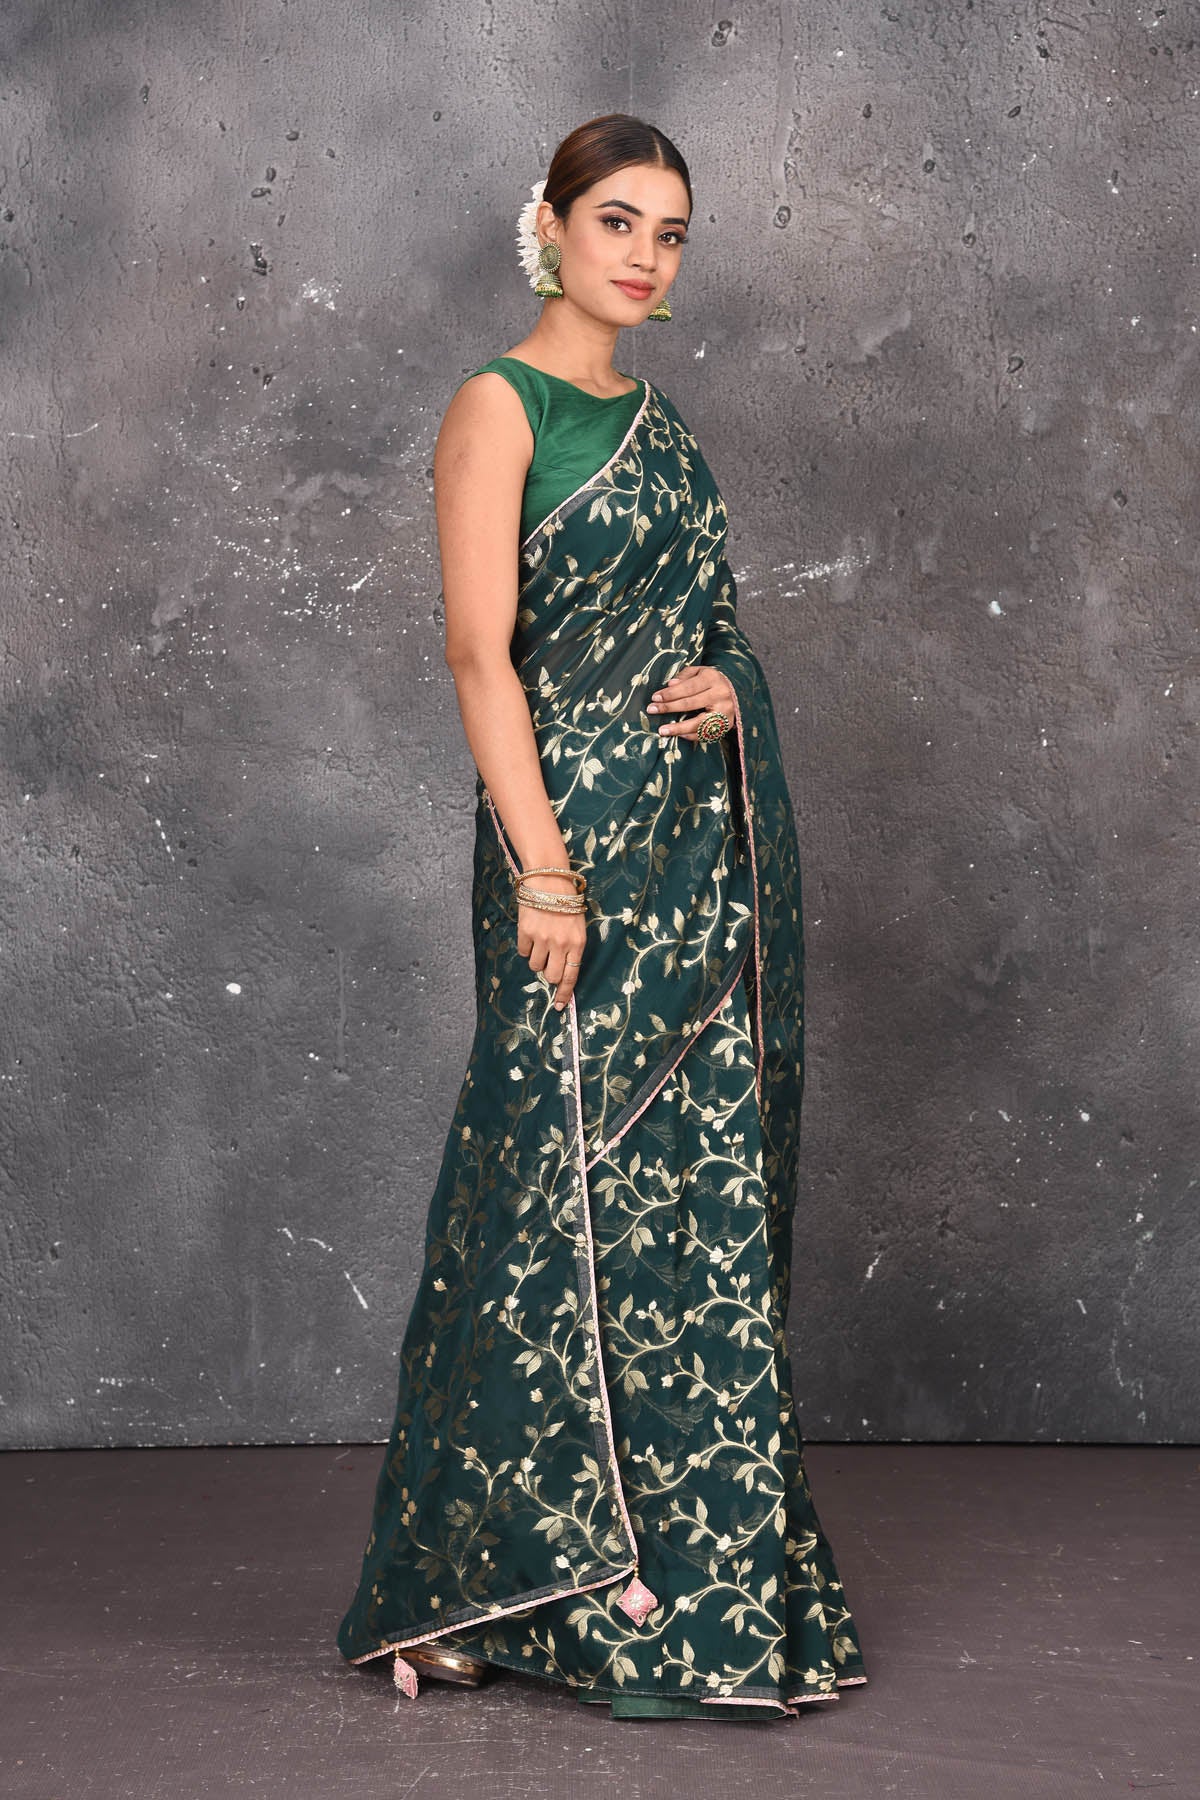 Buy exquisite dark green kora silk designer saree with floral jaal print online in USA. Pure kora sarees by Pure Elegance in green color. It has a beautiful floral jaal print all over. This kora brings the charm and simplicity of this saree with border and pallu. Shop this designer silk sari from Pure Elegance Indian fashion store in USA.-Side view.